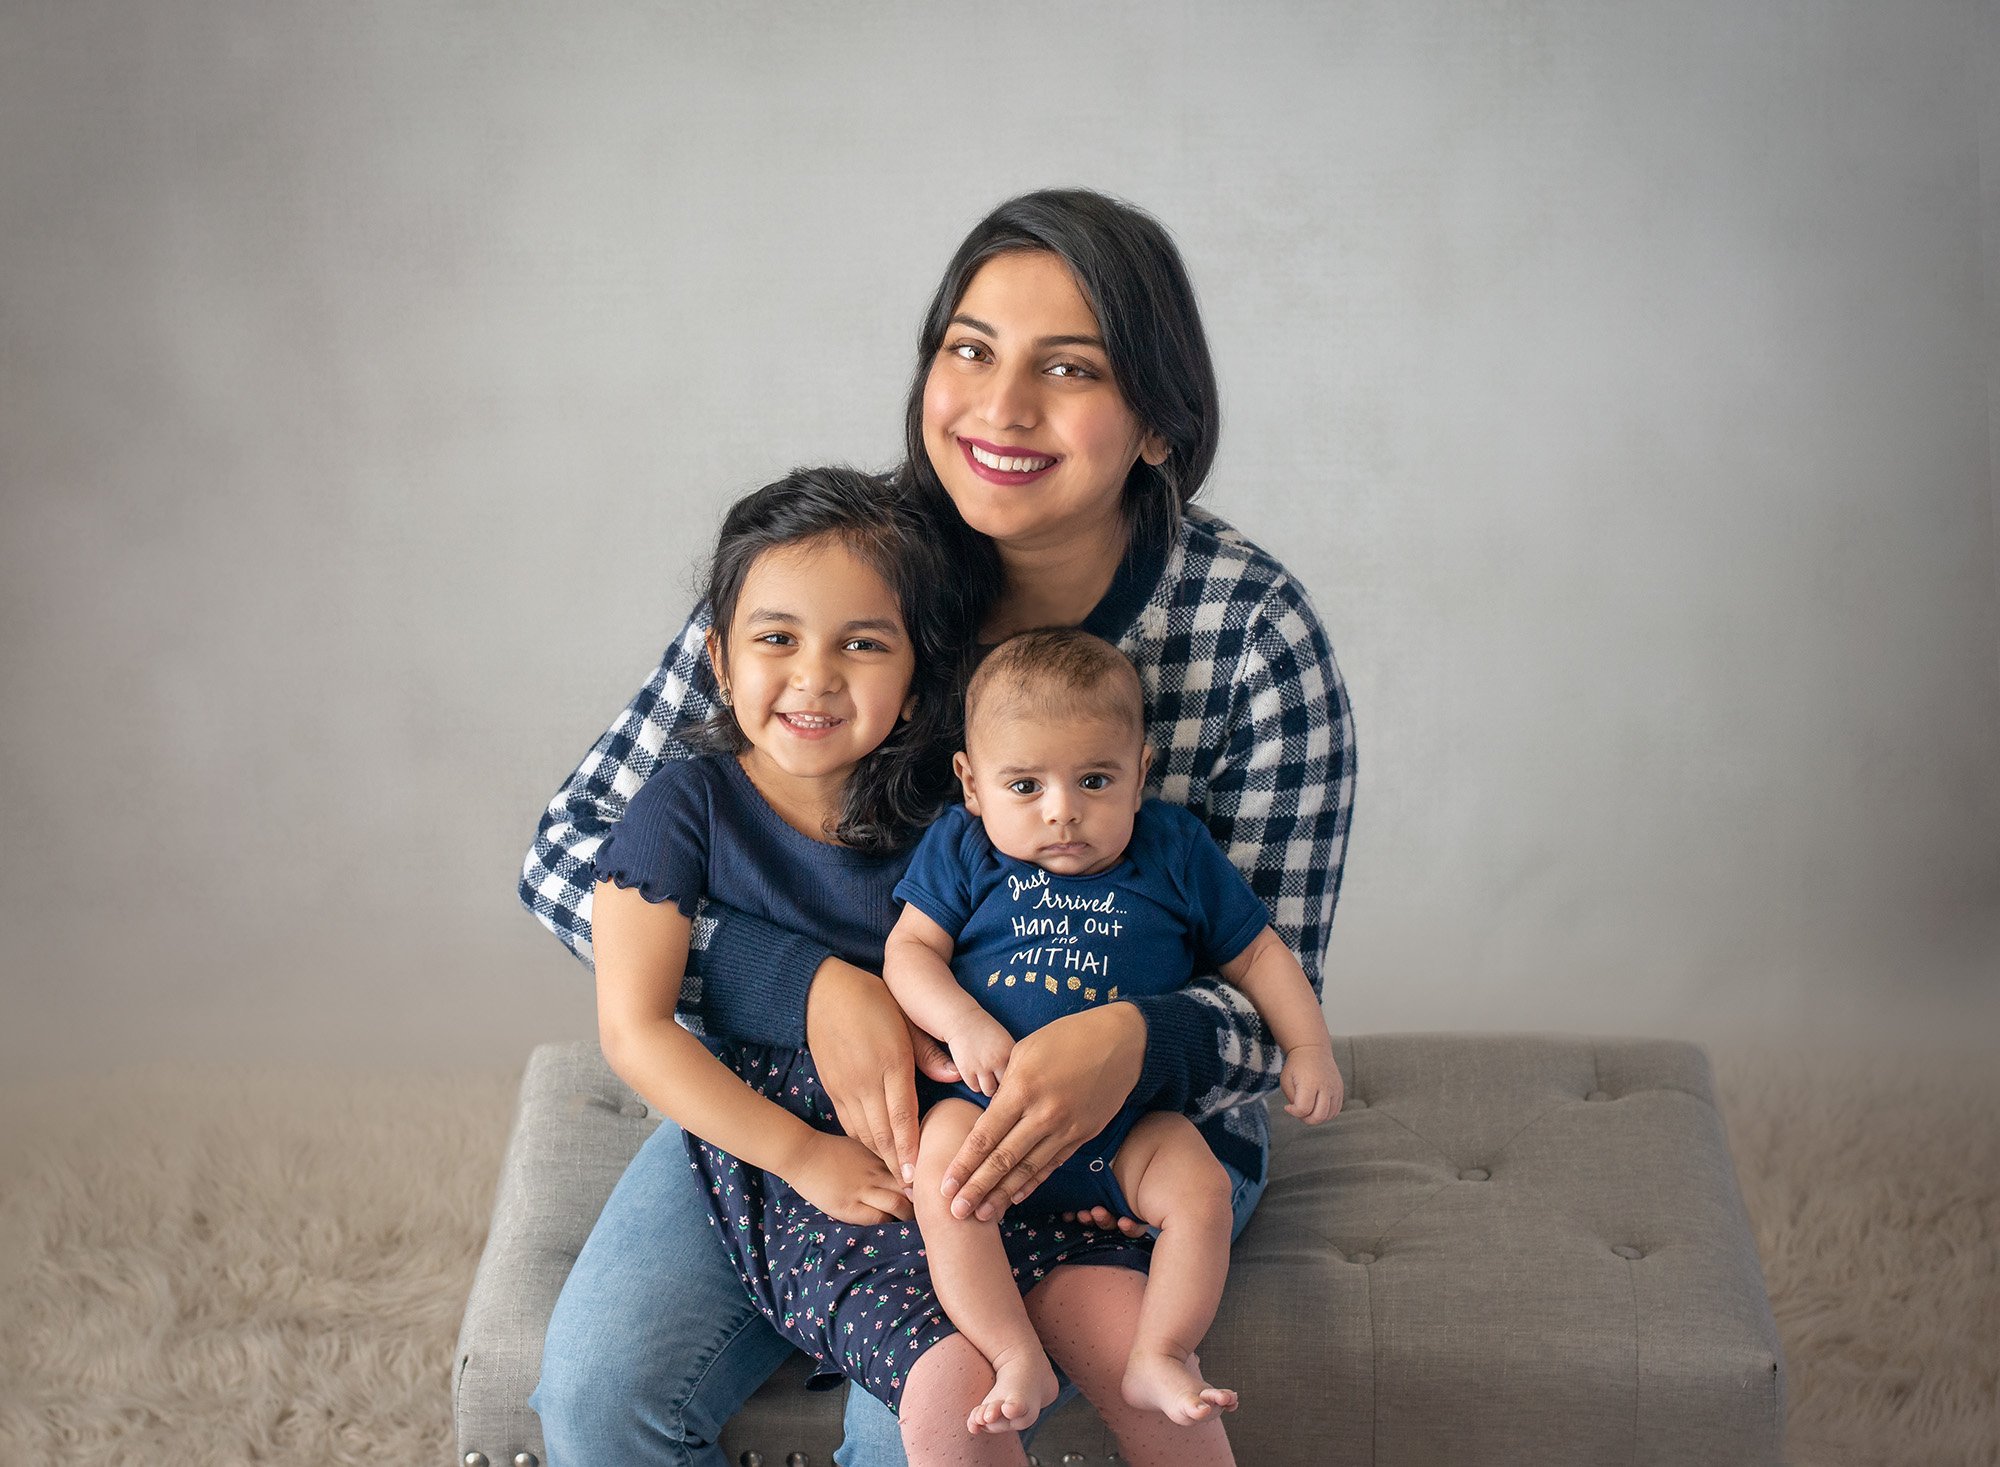 mom smiling holding young daughter and newborn baby boy all dressed in navy blue